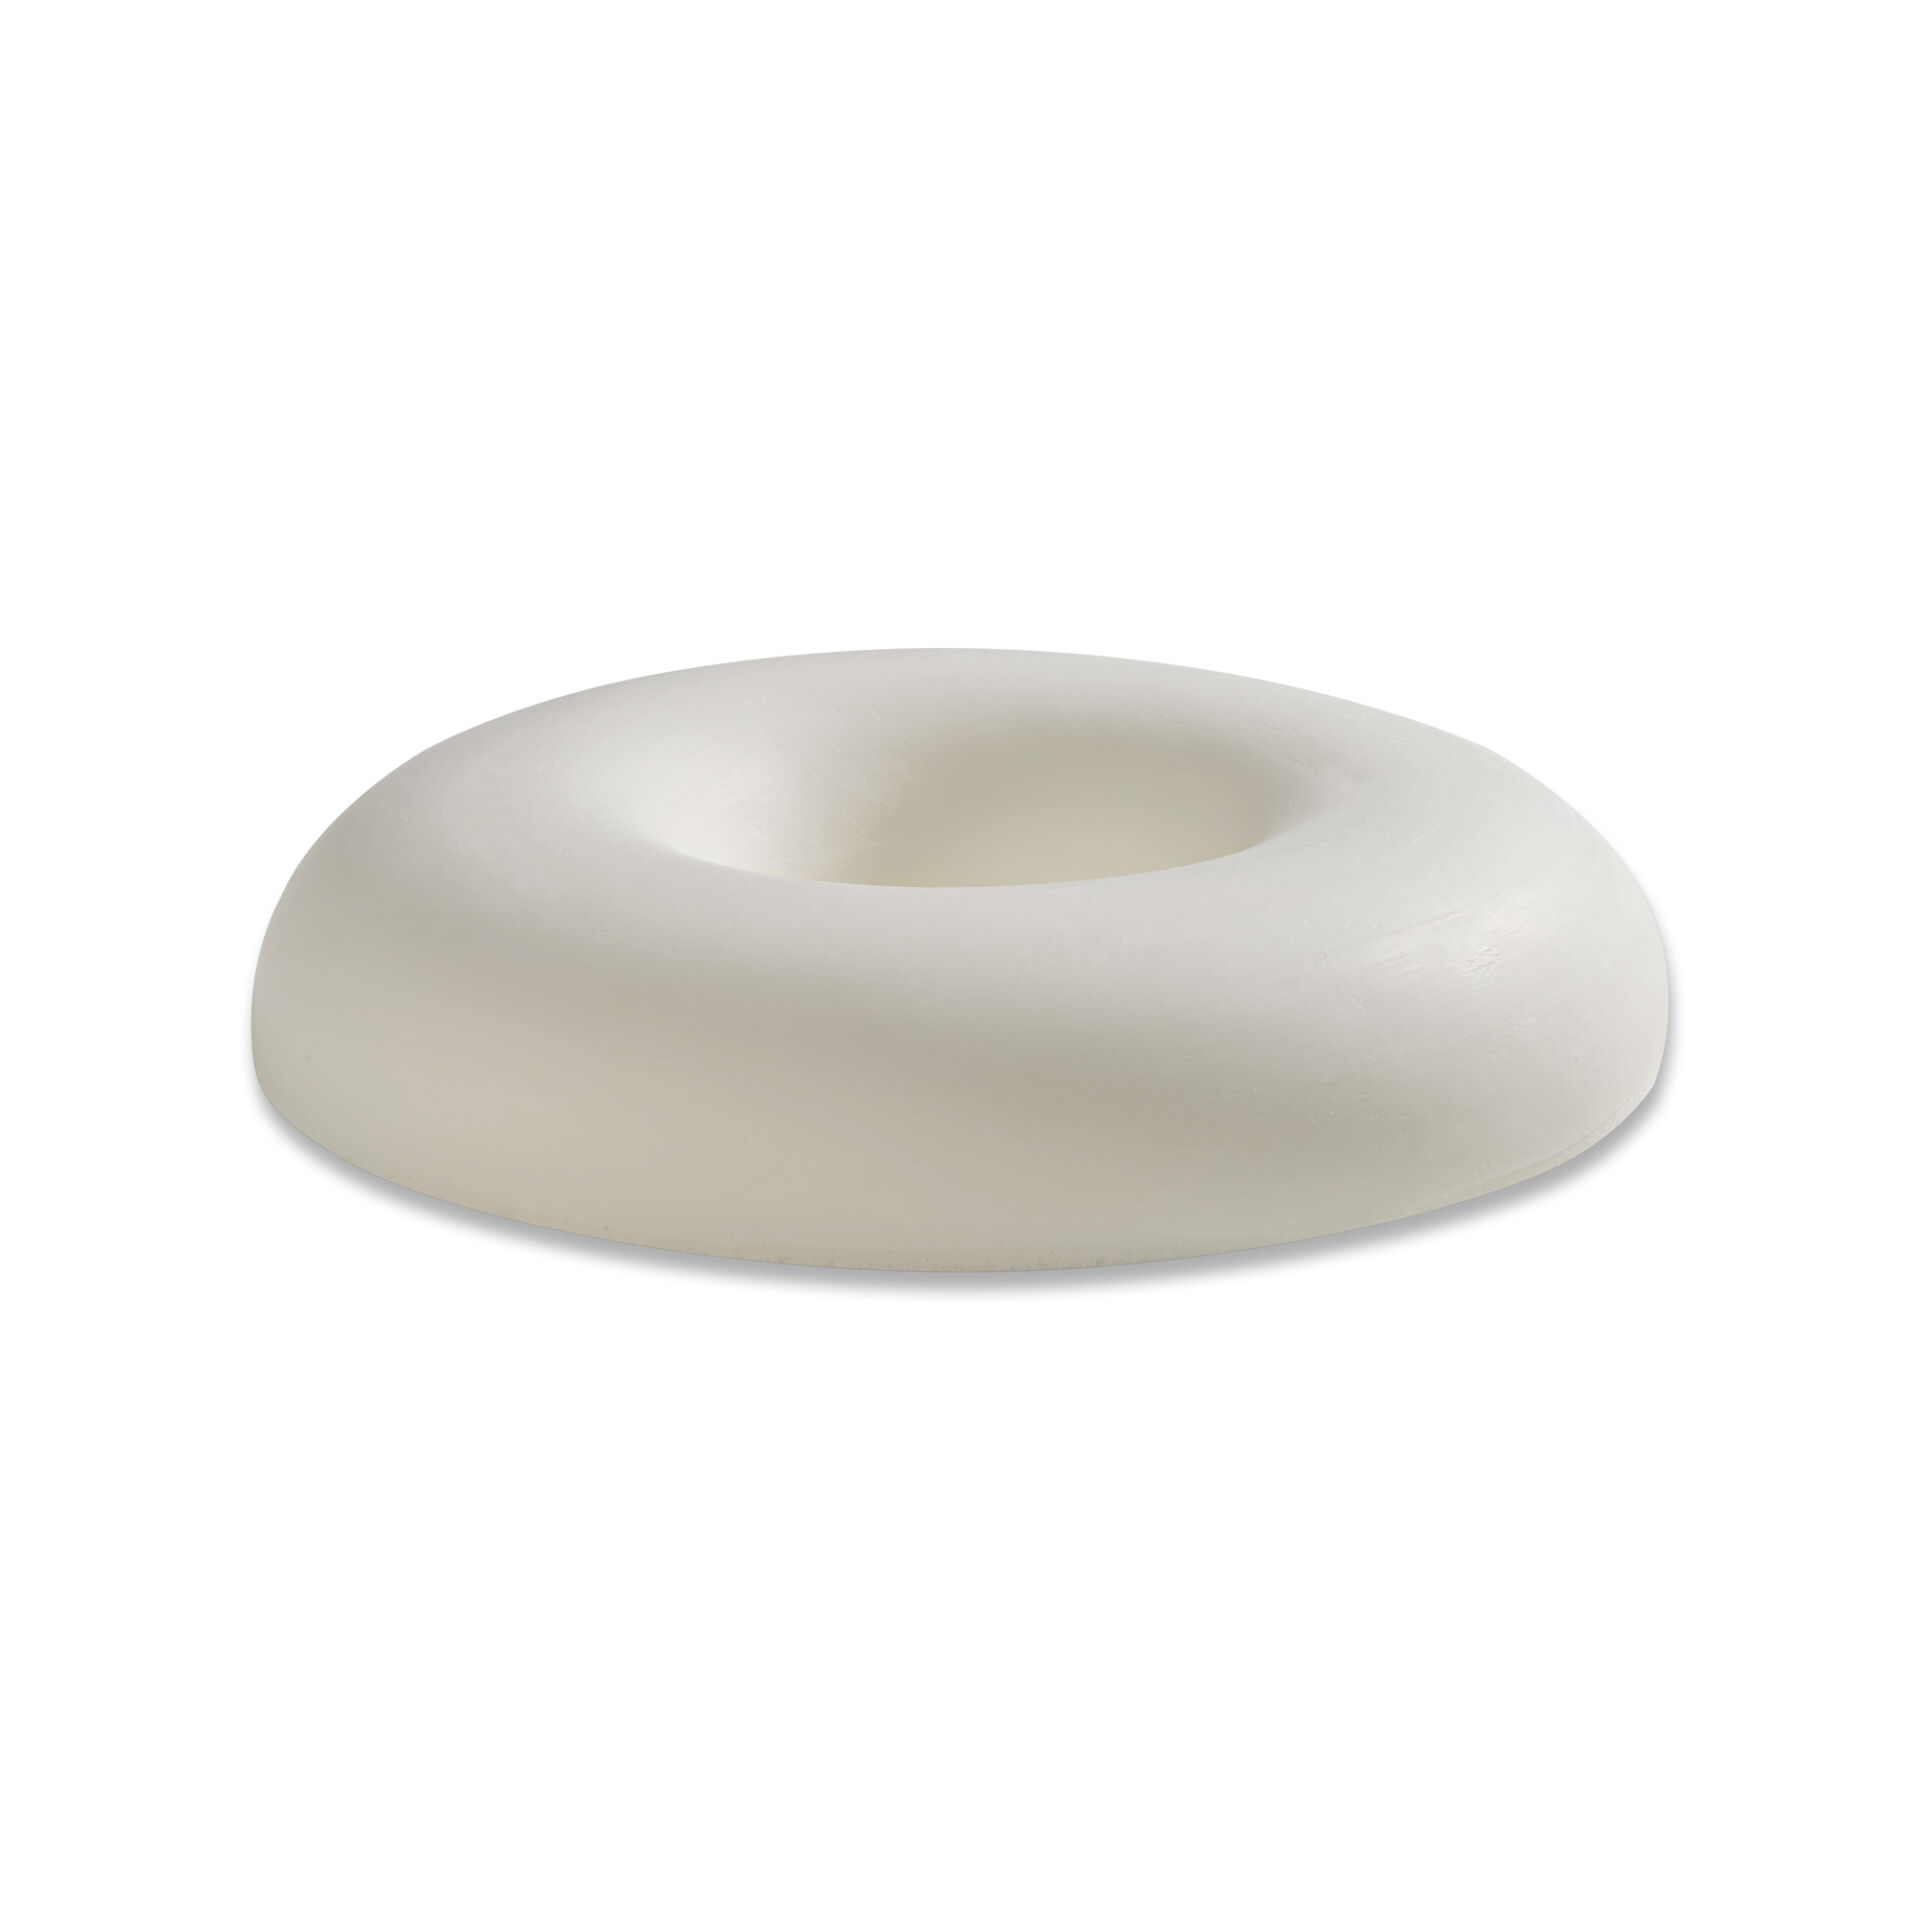 Donut Cushion Memory Foam Medical Ring Seat Pain Relief Orthopedic Pillow  Coccyx | eBay